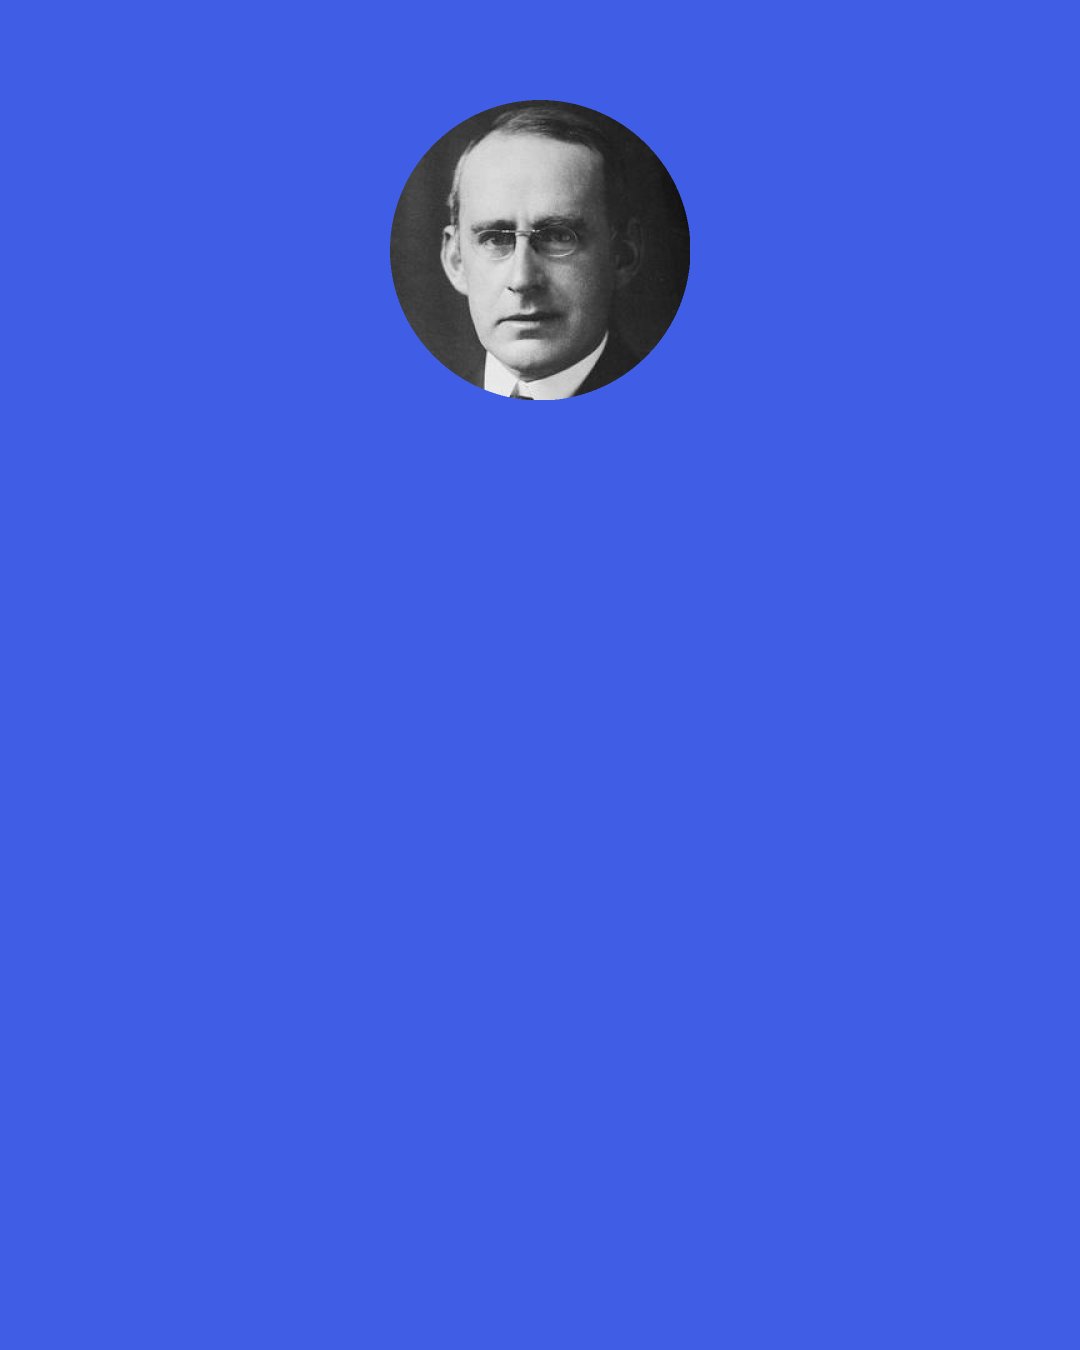 Arthur Eddington: Asked in 1919 whether it was true that only three people in the world understood the theory of general relativity, [Eddington] allegedly replied: "Who's the third?"